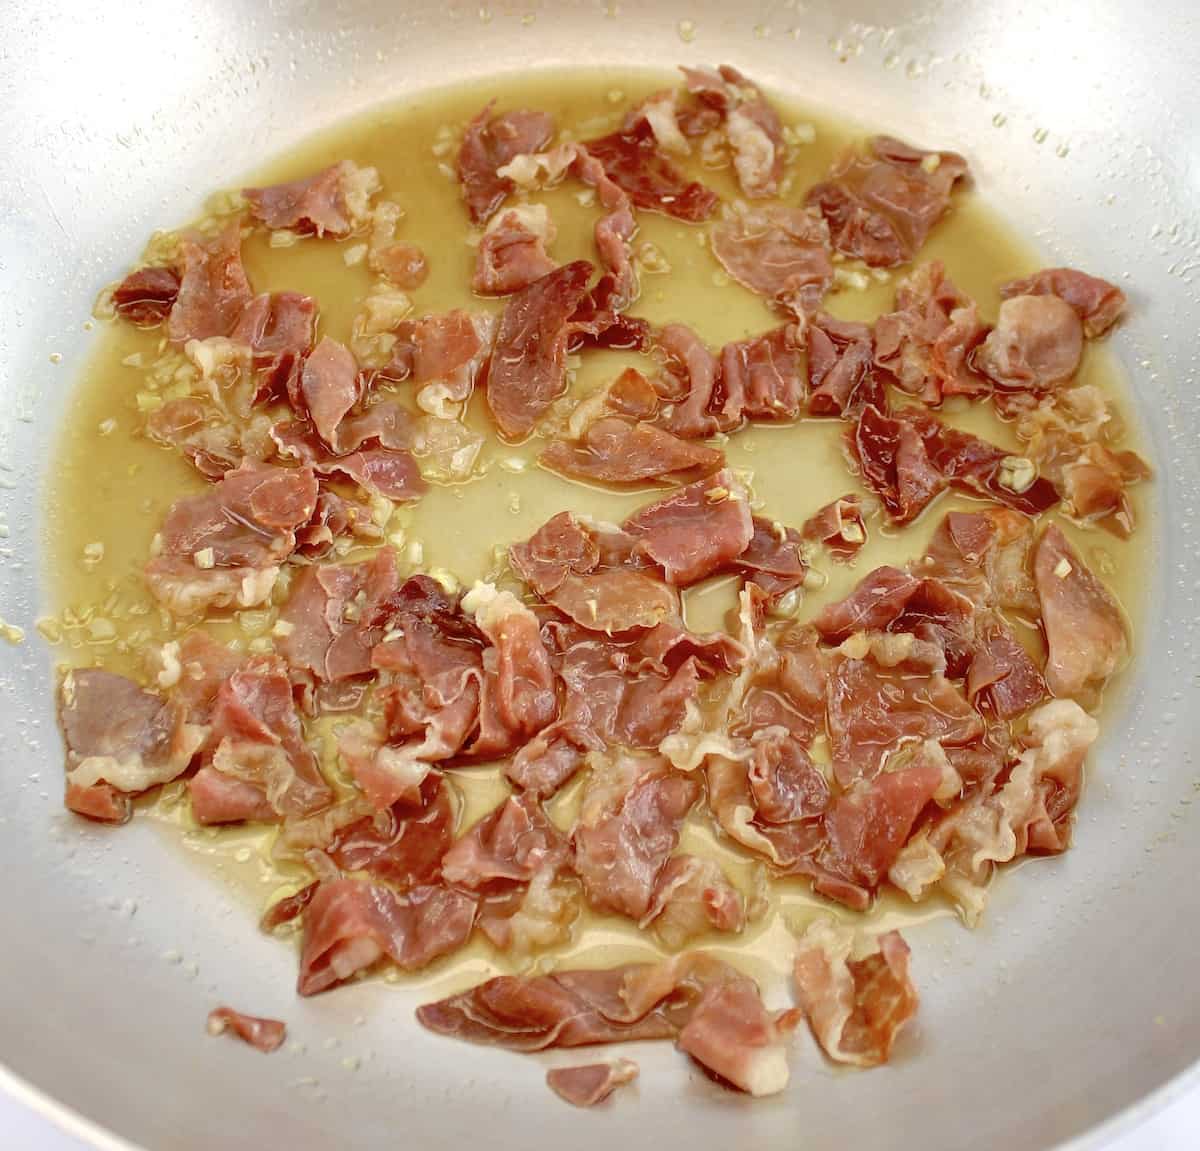 prosciutto being sauteed in skillet with vodka